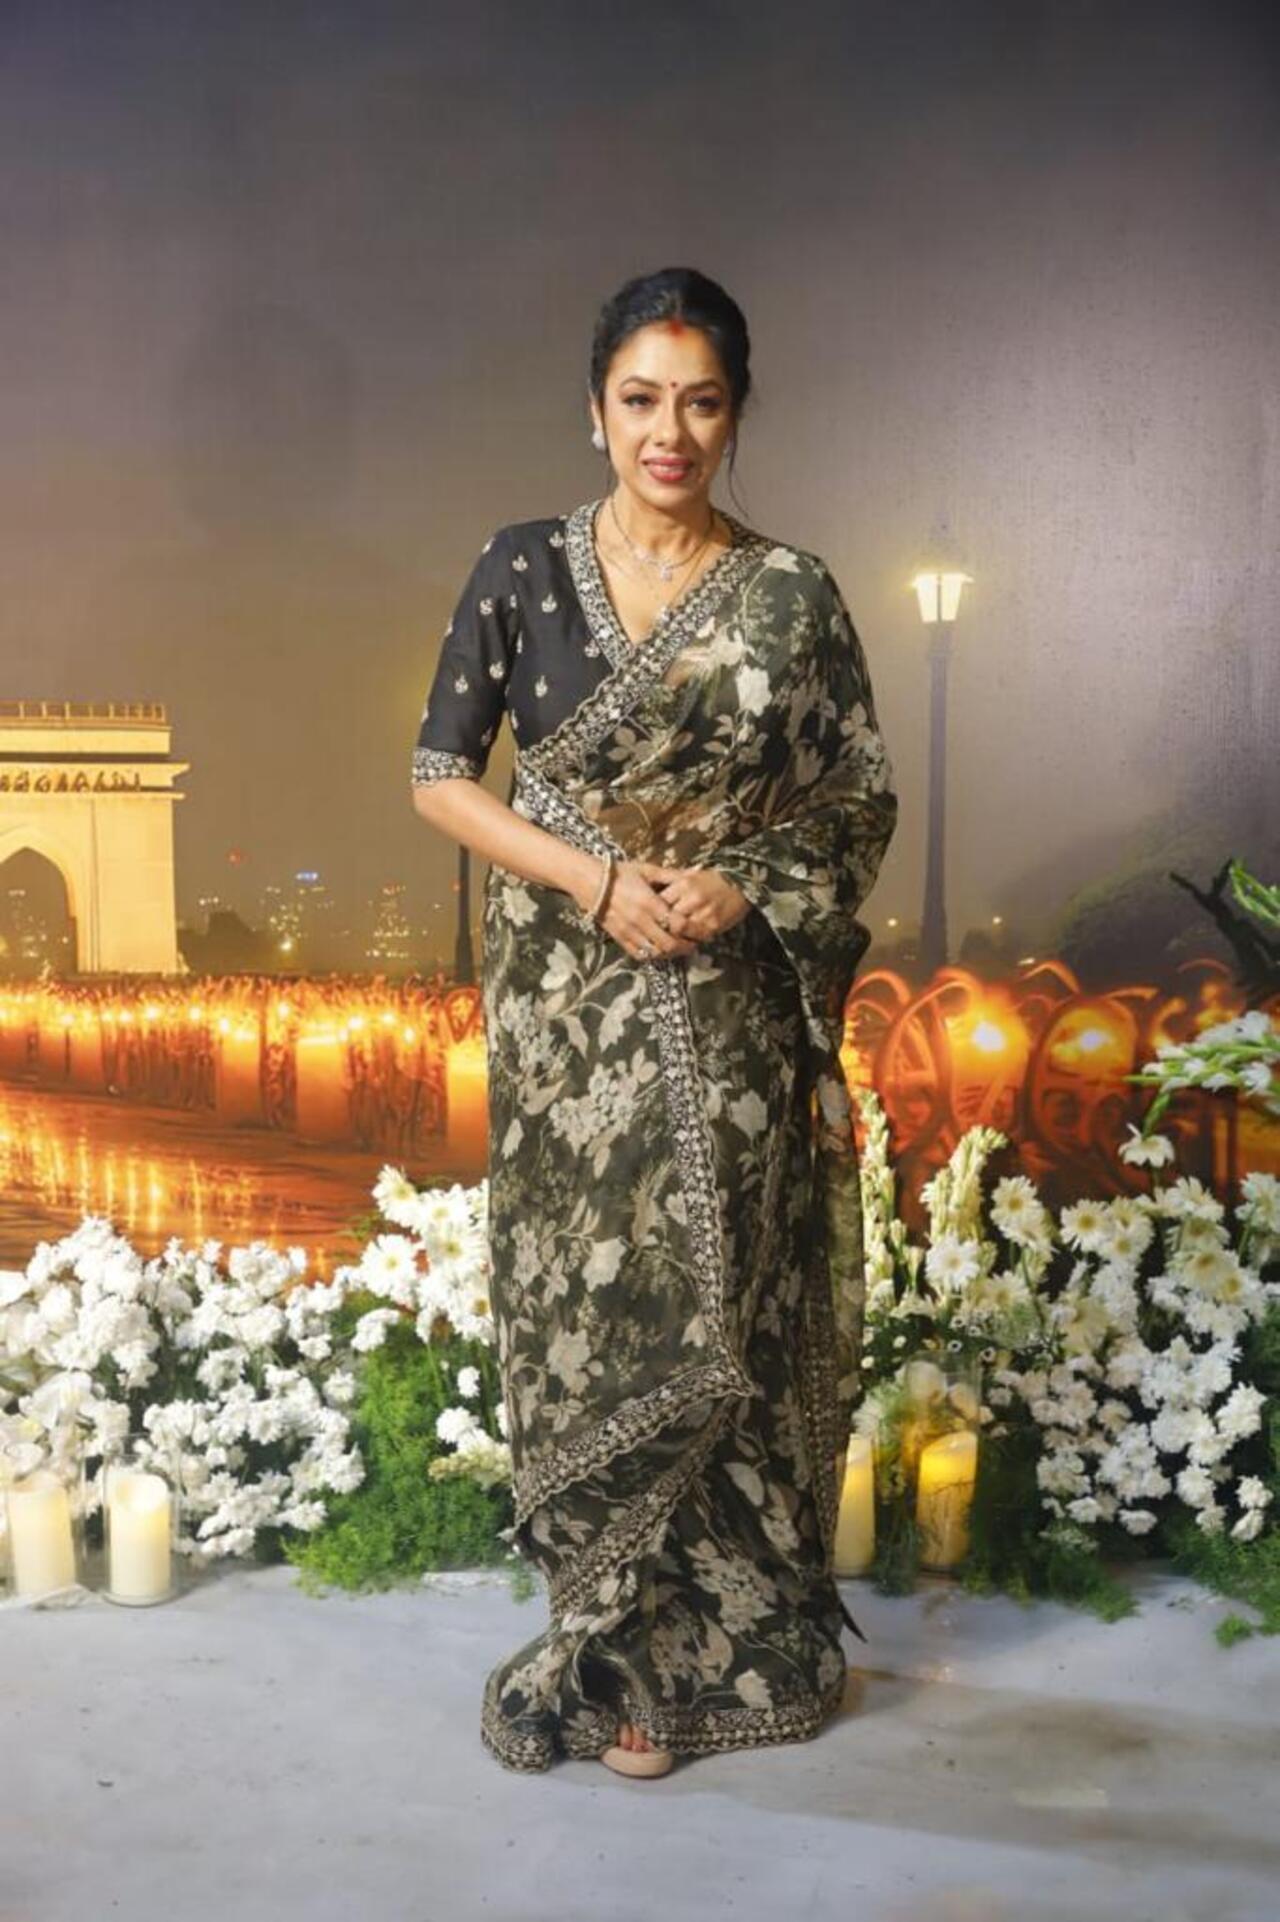 Rupali Ganguly also attended the event